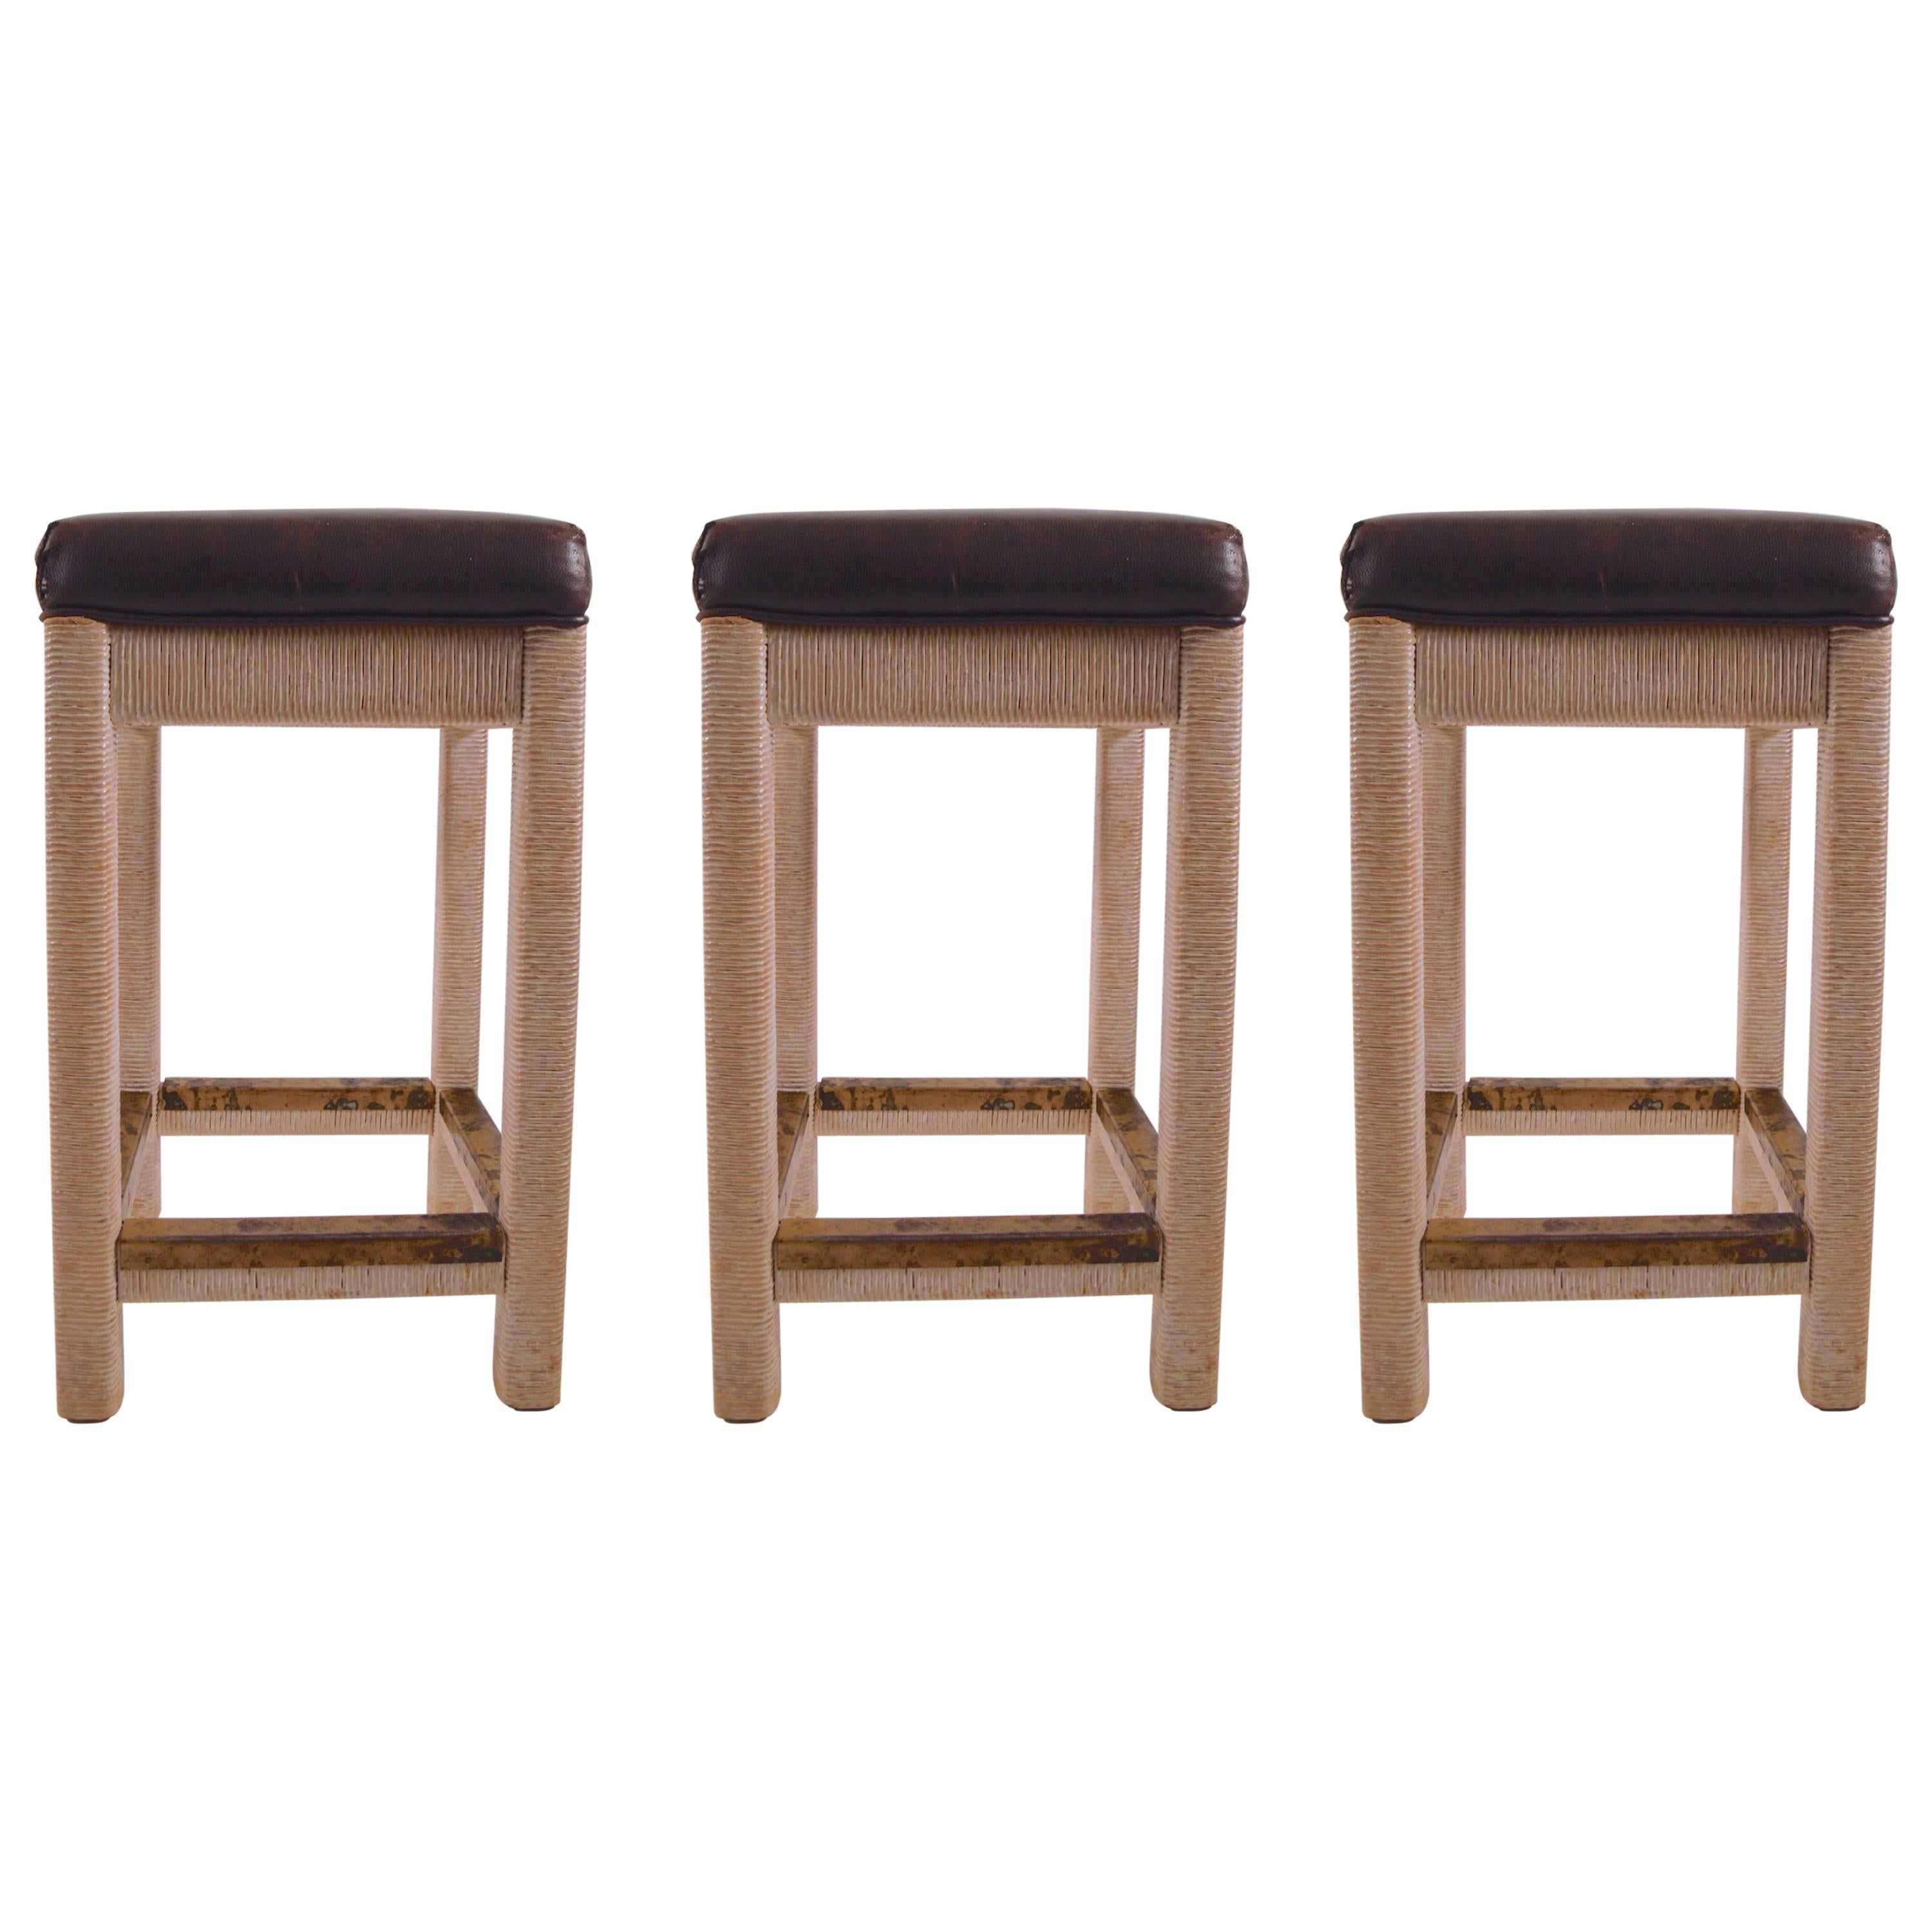 Three Wrapped Twine and Leather Counter Height Stools by Henry Link